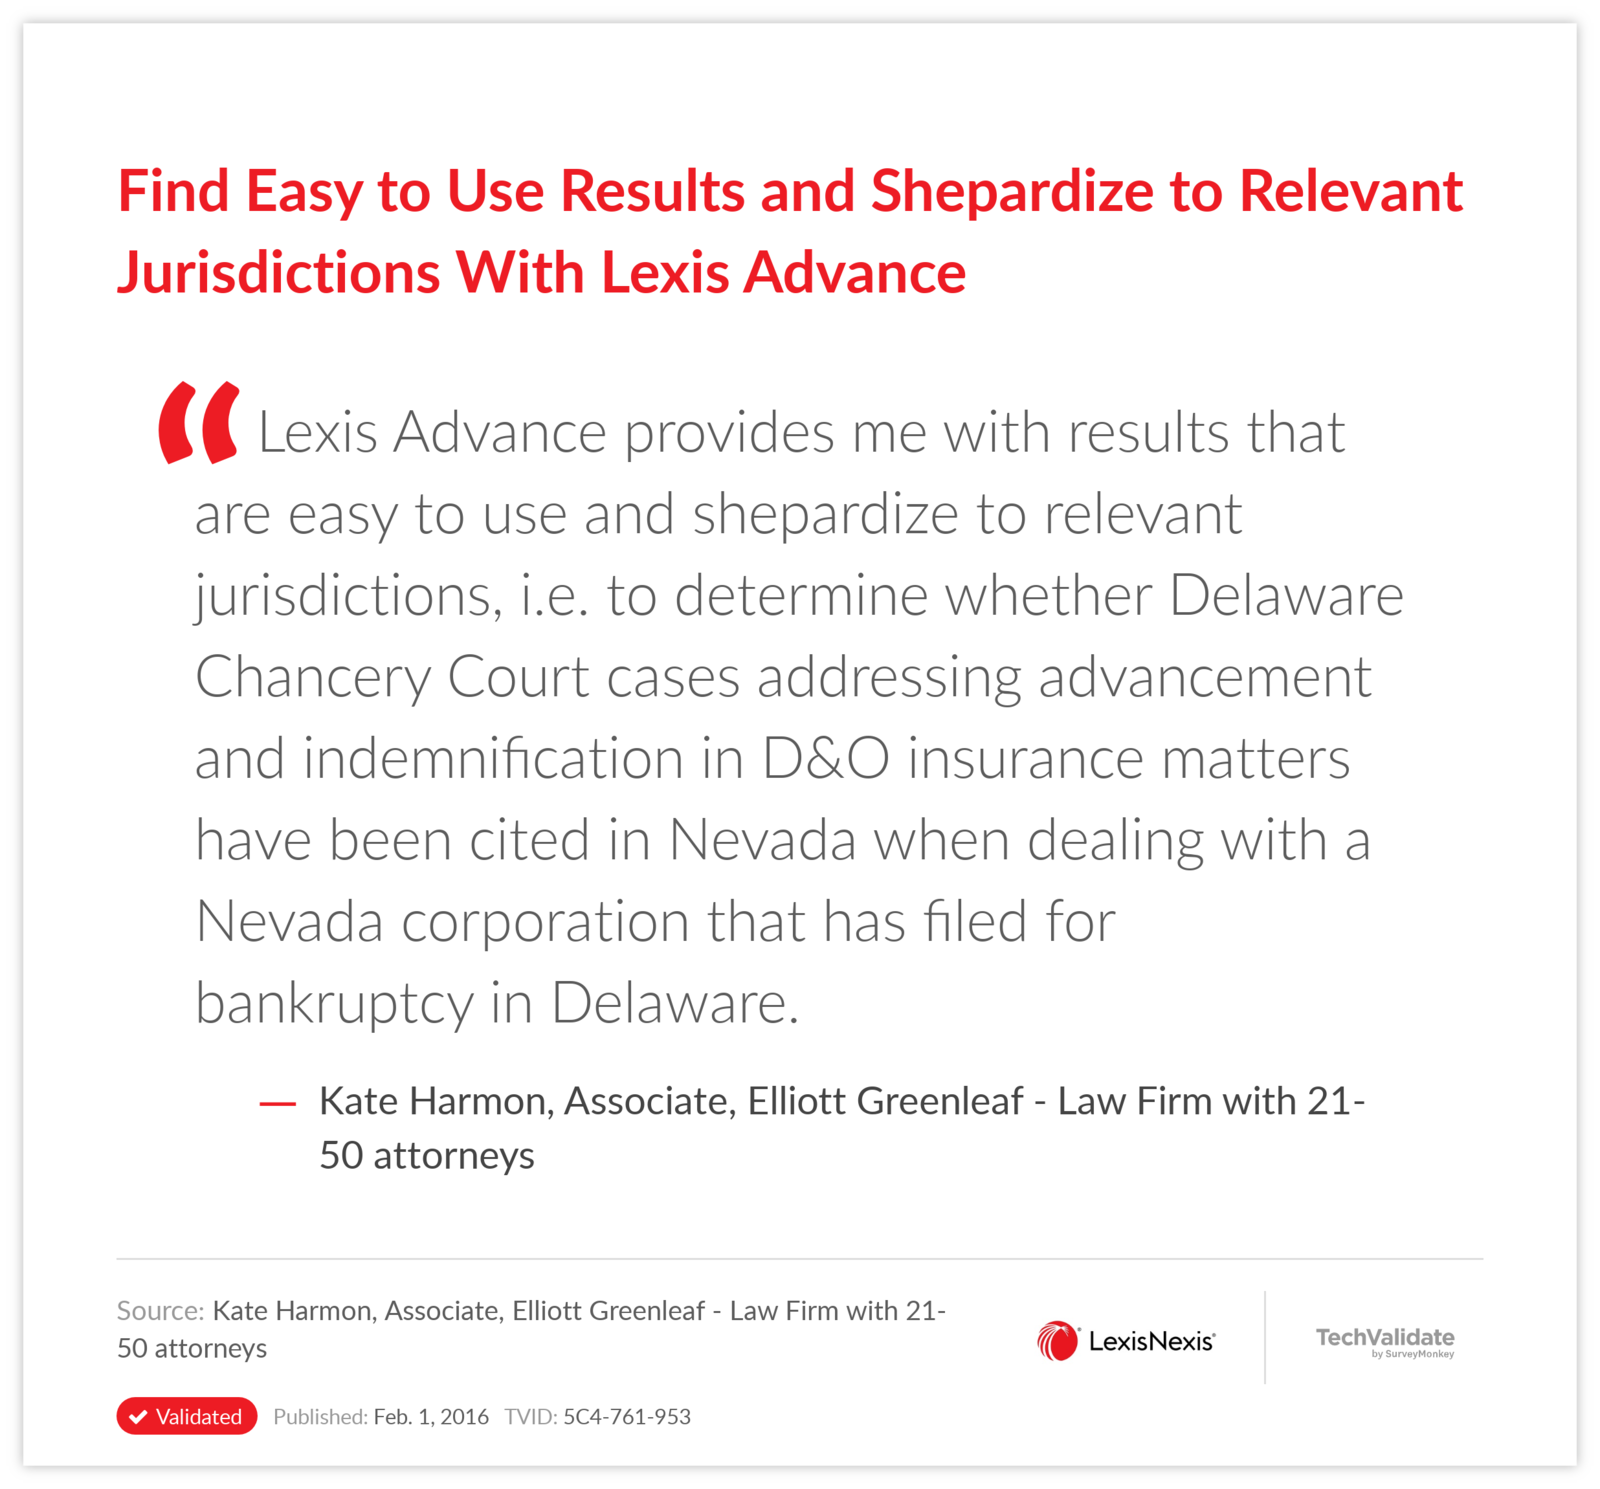 Find Easy to Use Results and Shepardize to Relevant Jurisdictions With Lexis Advance